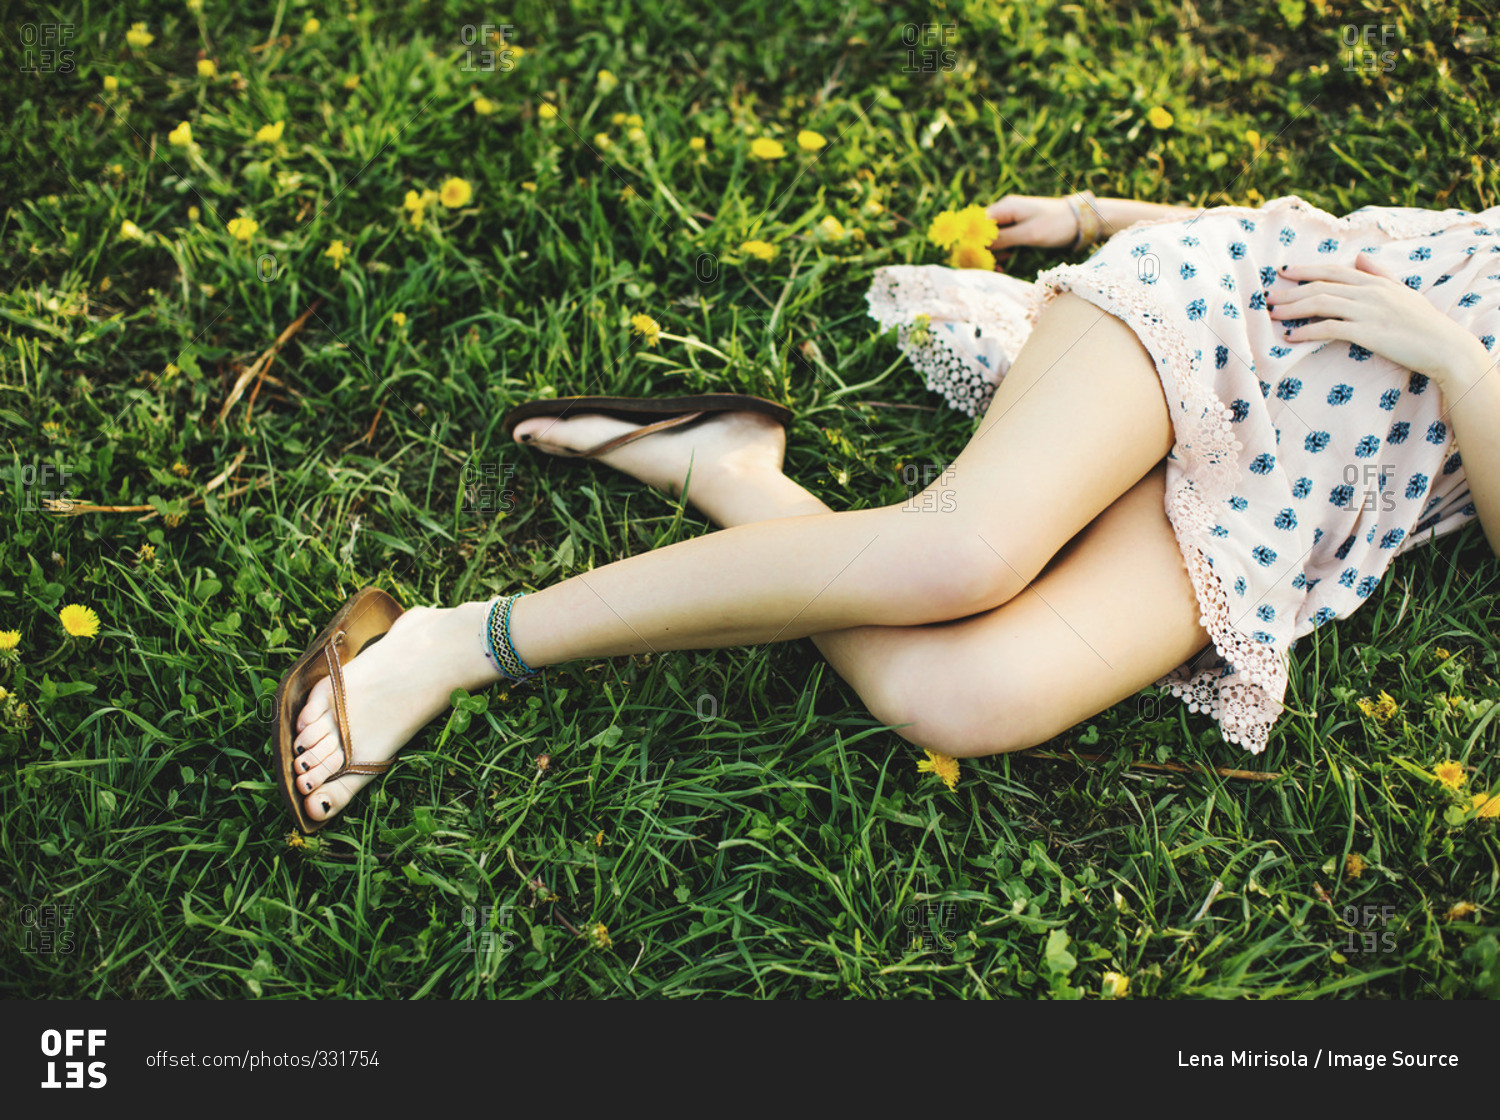 Waist down high angle view of young woman lying on grass wearing dress, flip  flops and ankle bracelet stock photo - OFFSET